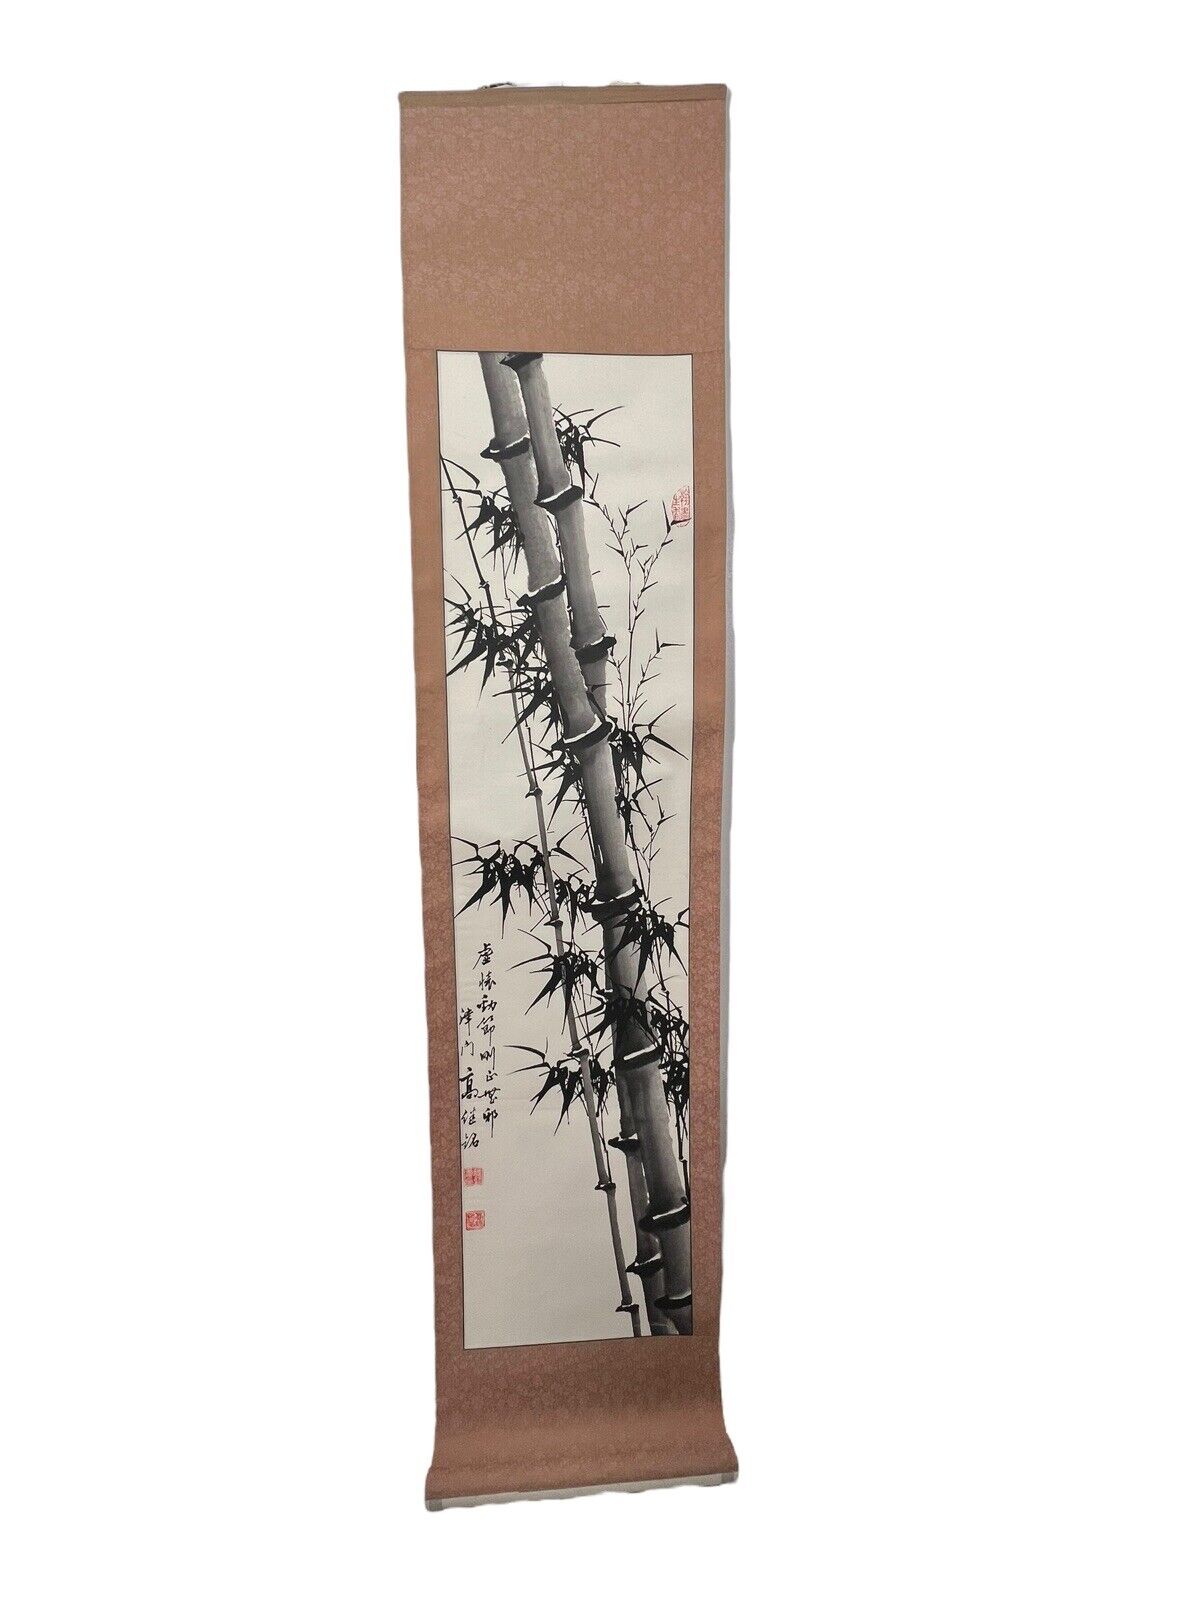 Vtg Inked Watercolor Chinese Painting Hanging Scroll Bamboo Calligraphy Signed